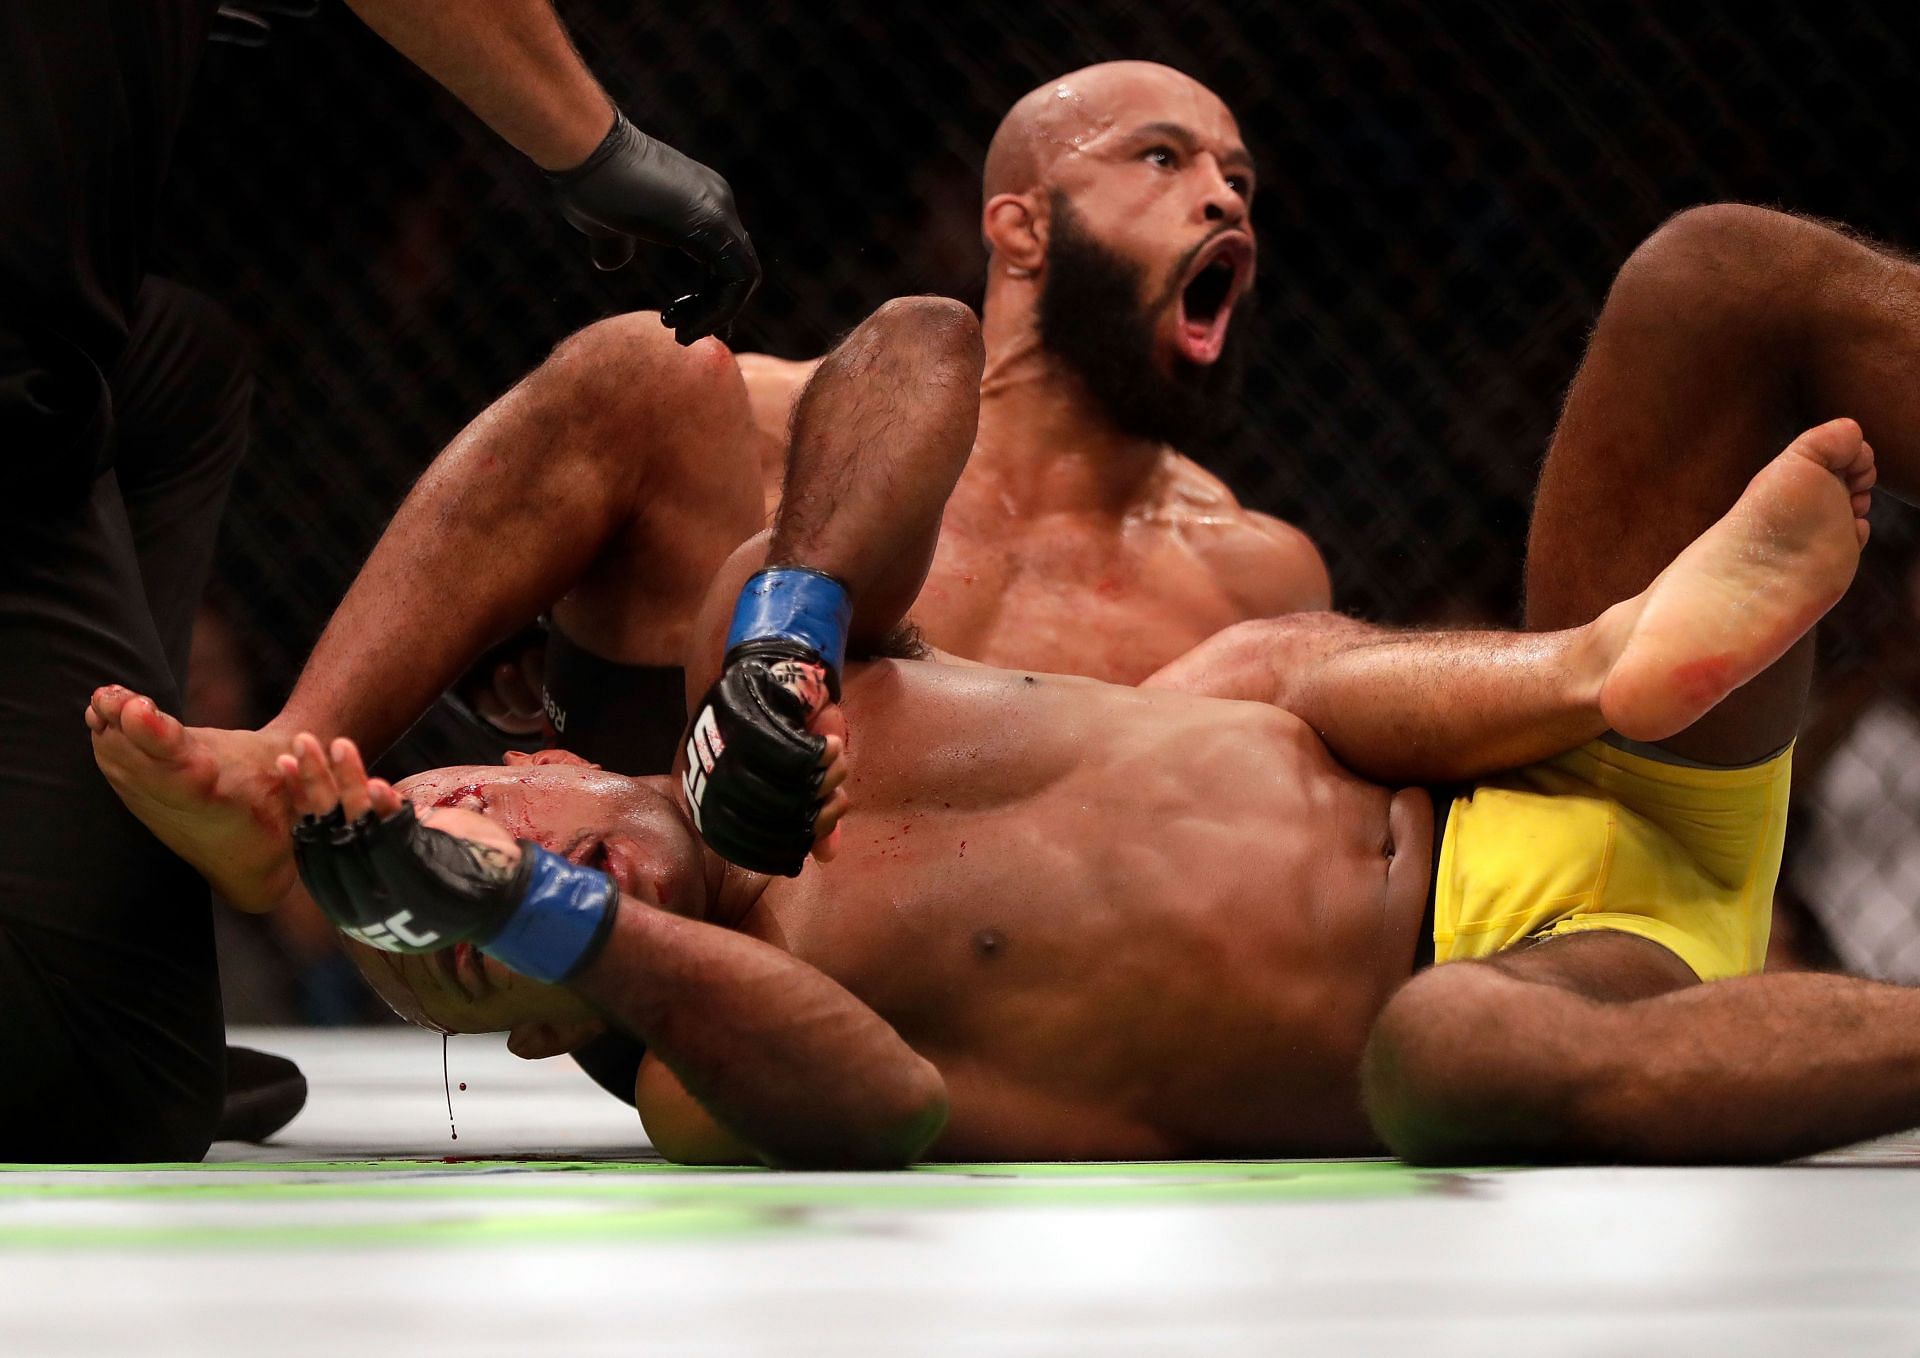 Demetrious Johnson unleashed a genius-level submission to dispatch Ray Borg